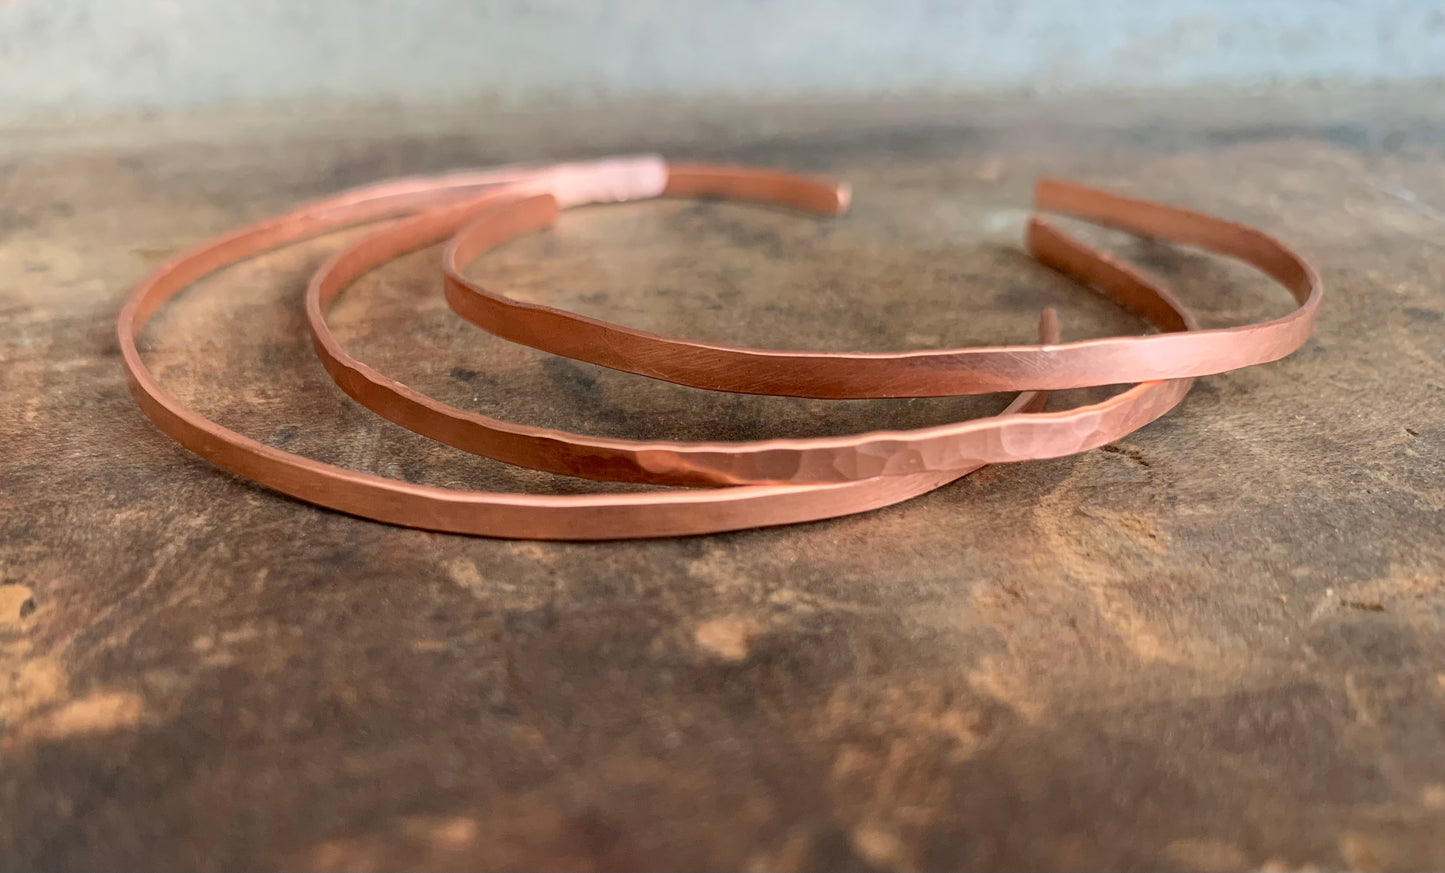 Wisp Copper Cuff Bangle Bracelet - Handmade. Hammered. Your choice of Texture. One Bangle